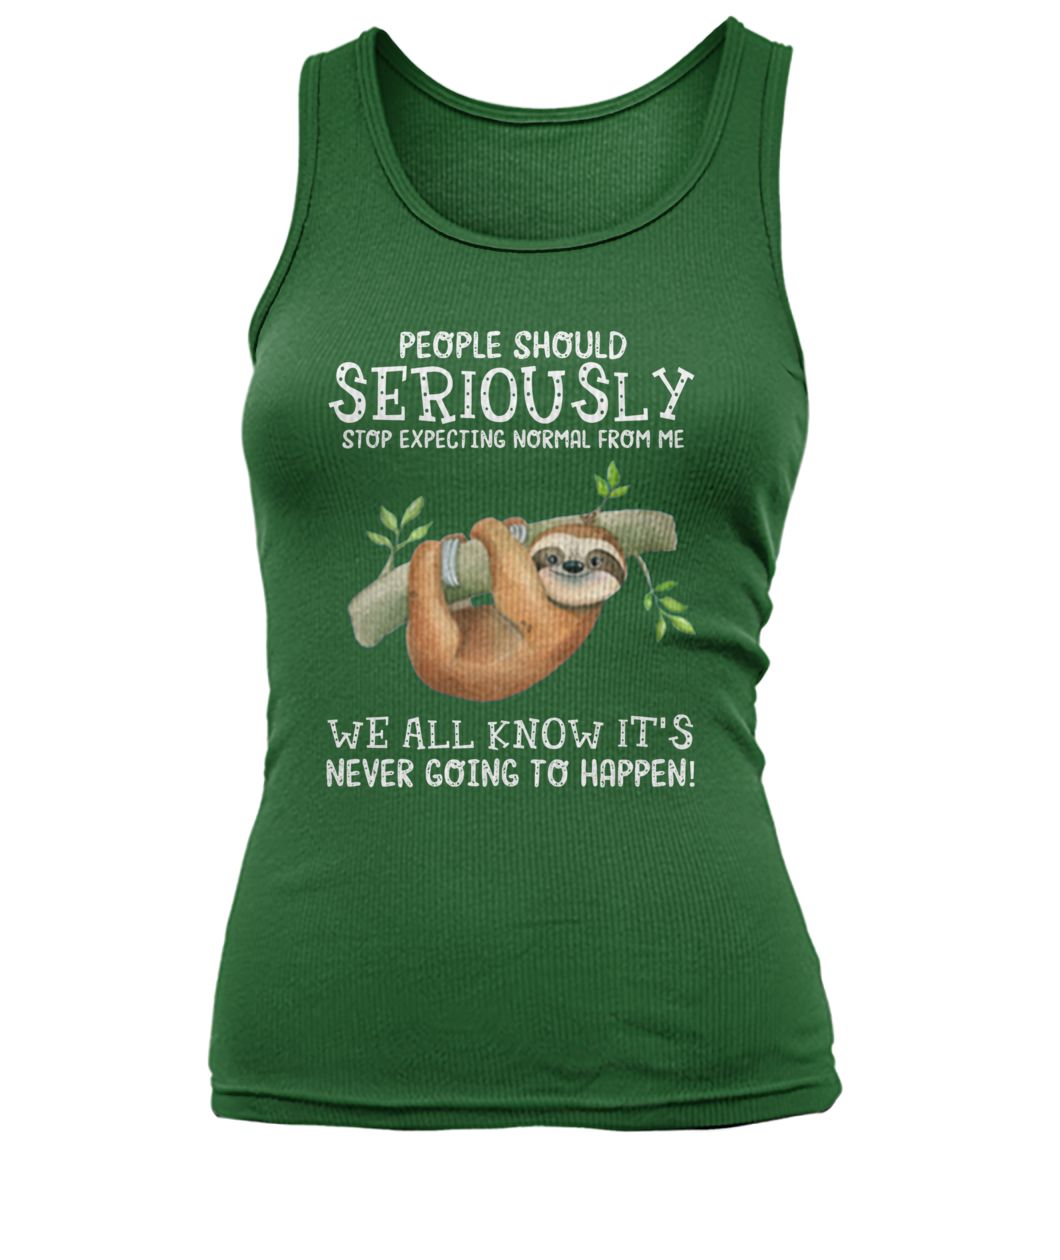 People should seriously stop expecting normal from me sloth women's tank top